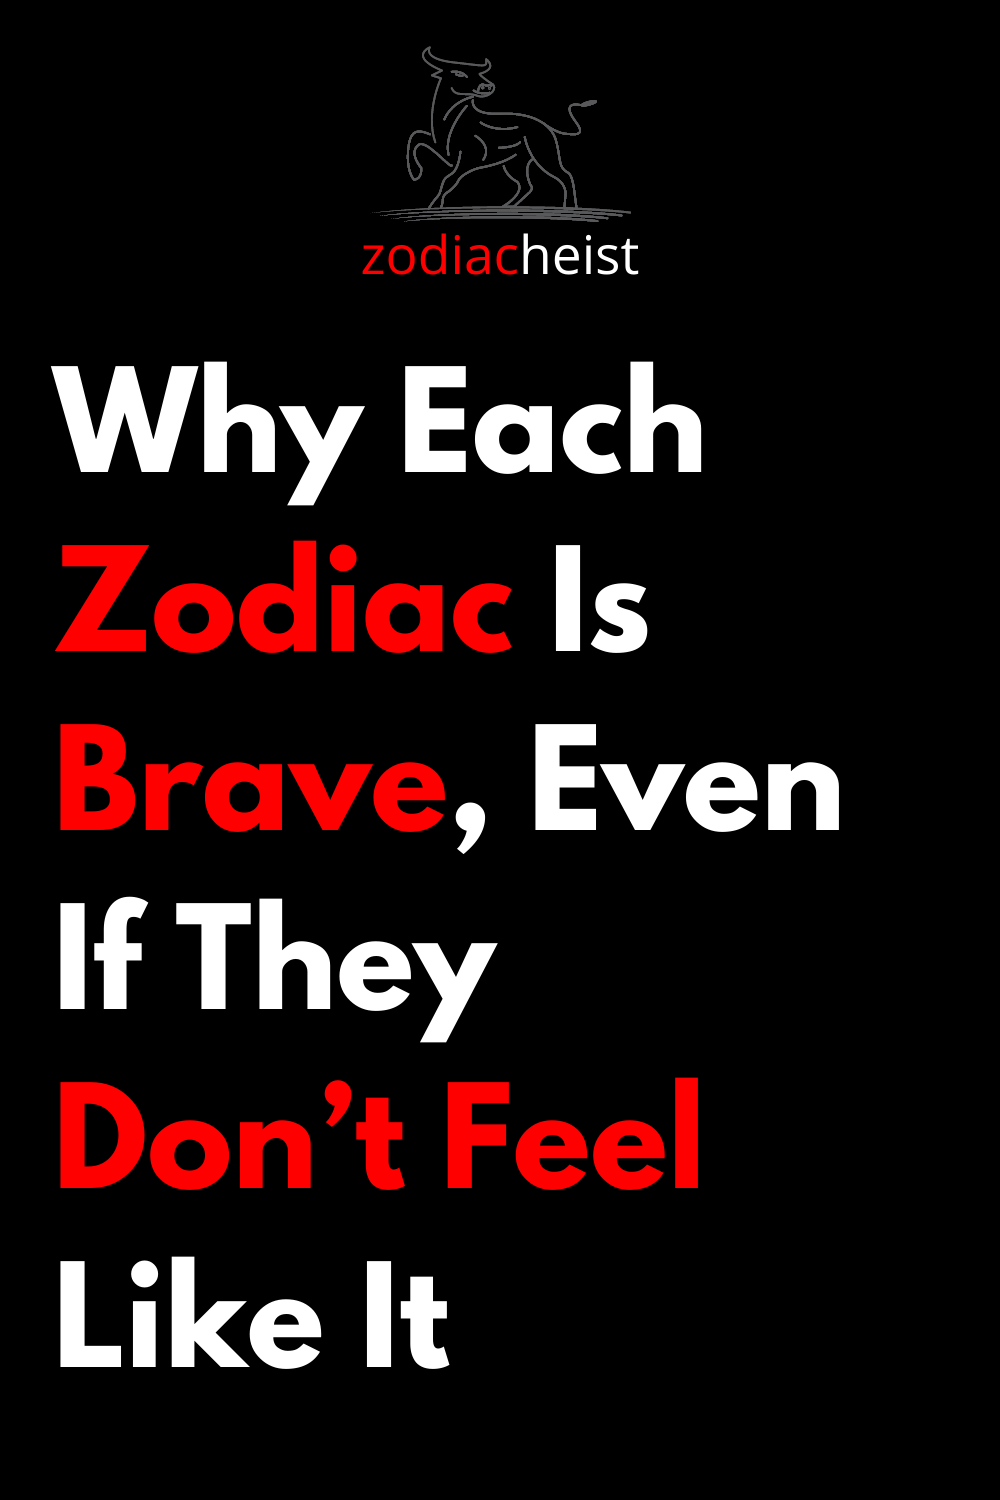 Why Each Zodiac Is Brave, Even If They Don’t Feel Like It